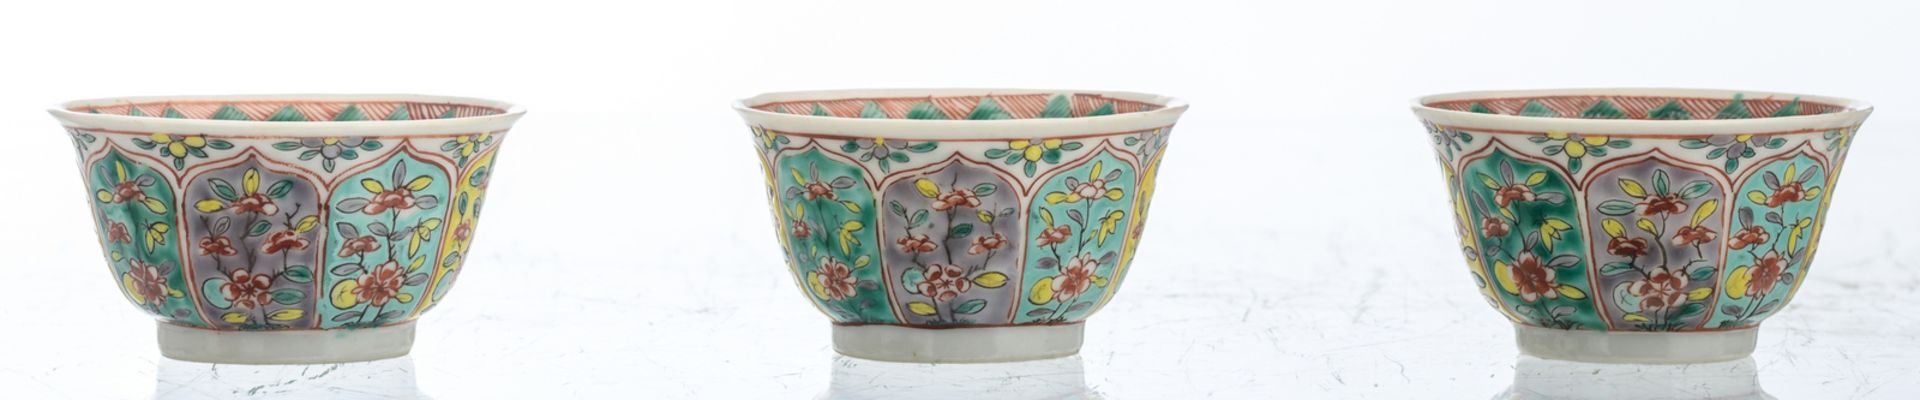 Six Chinese polychrome floral decorated cups and saucers, 18thC, H 2 - 5 cm - Image 7 of 9